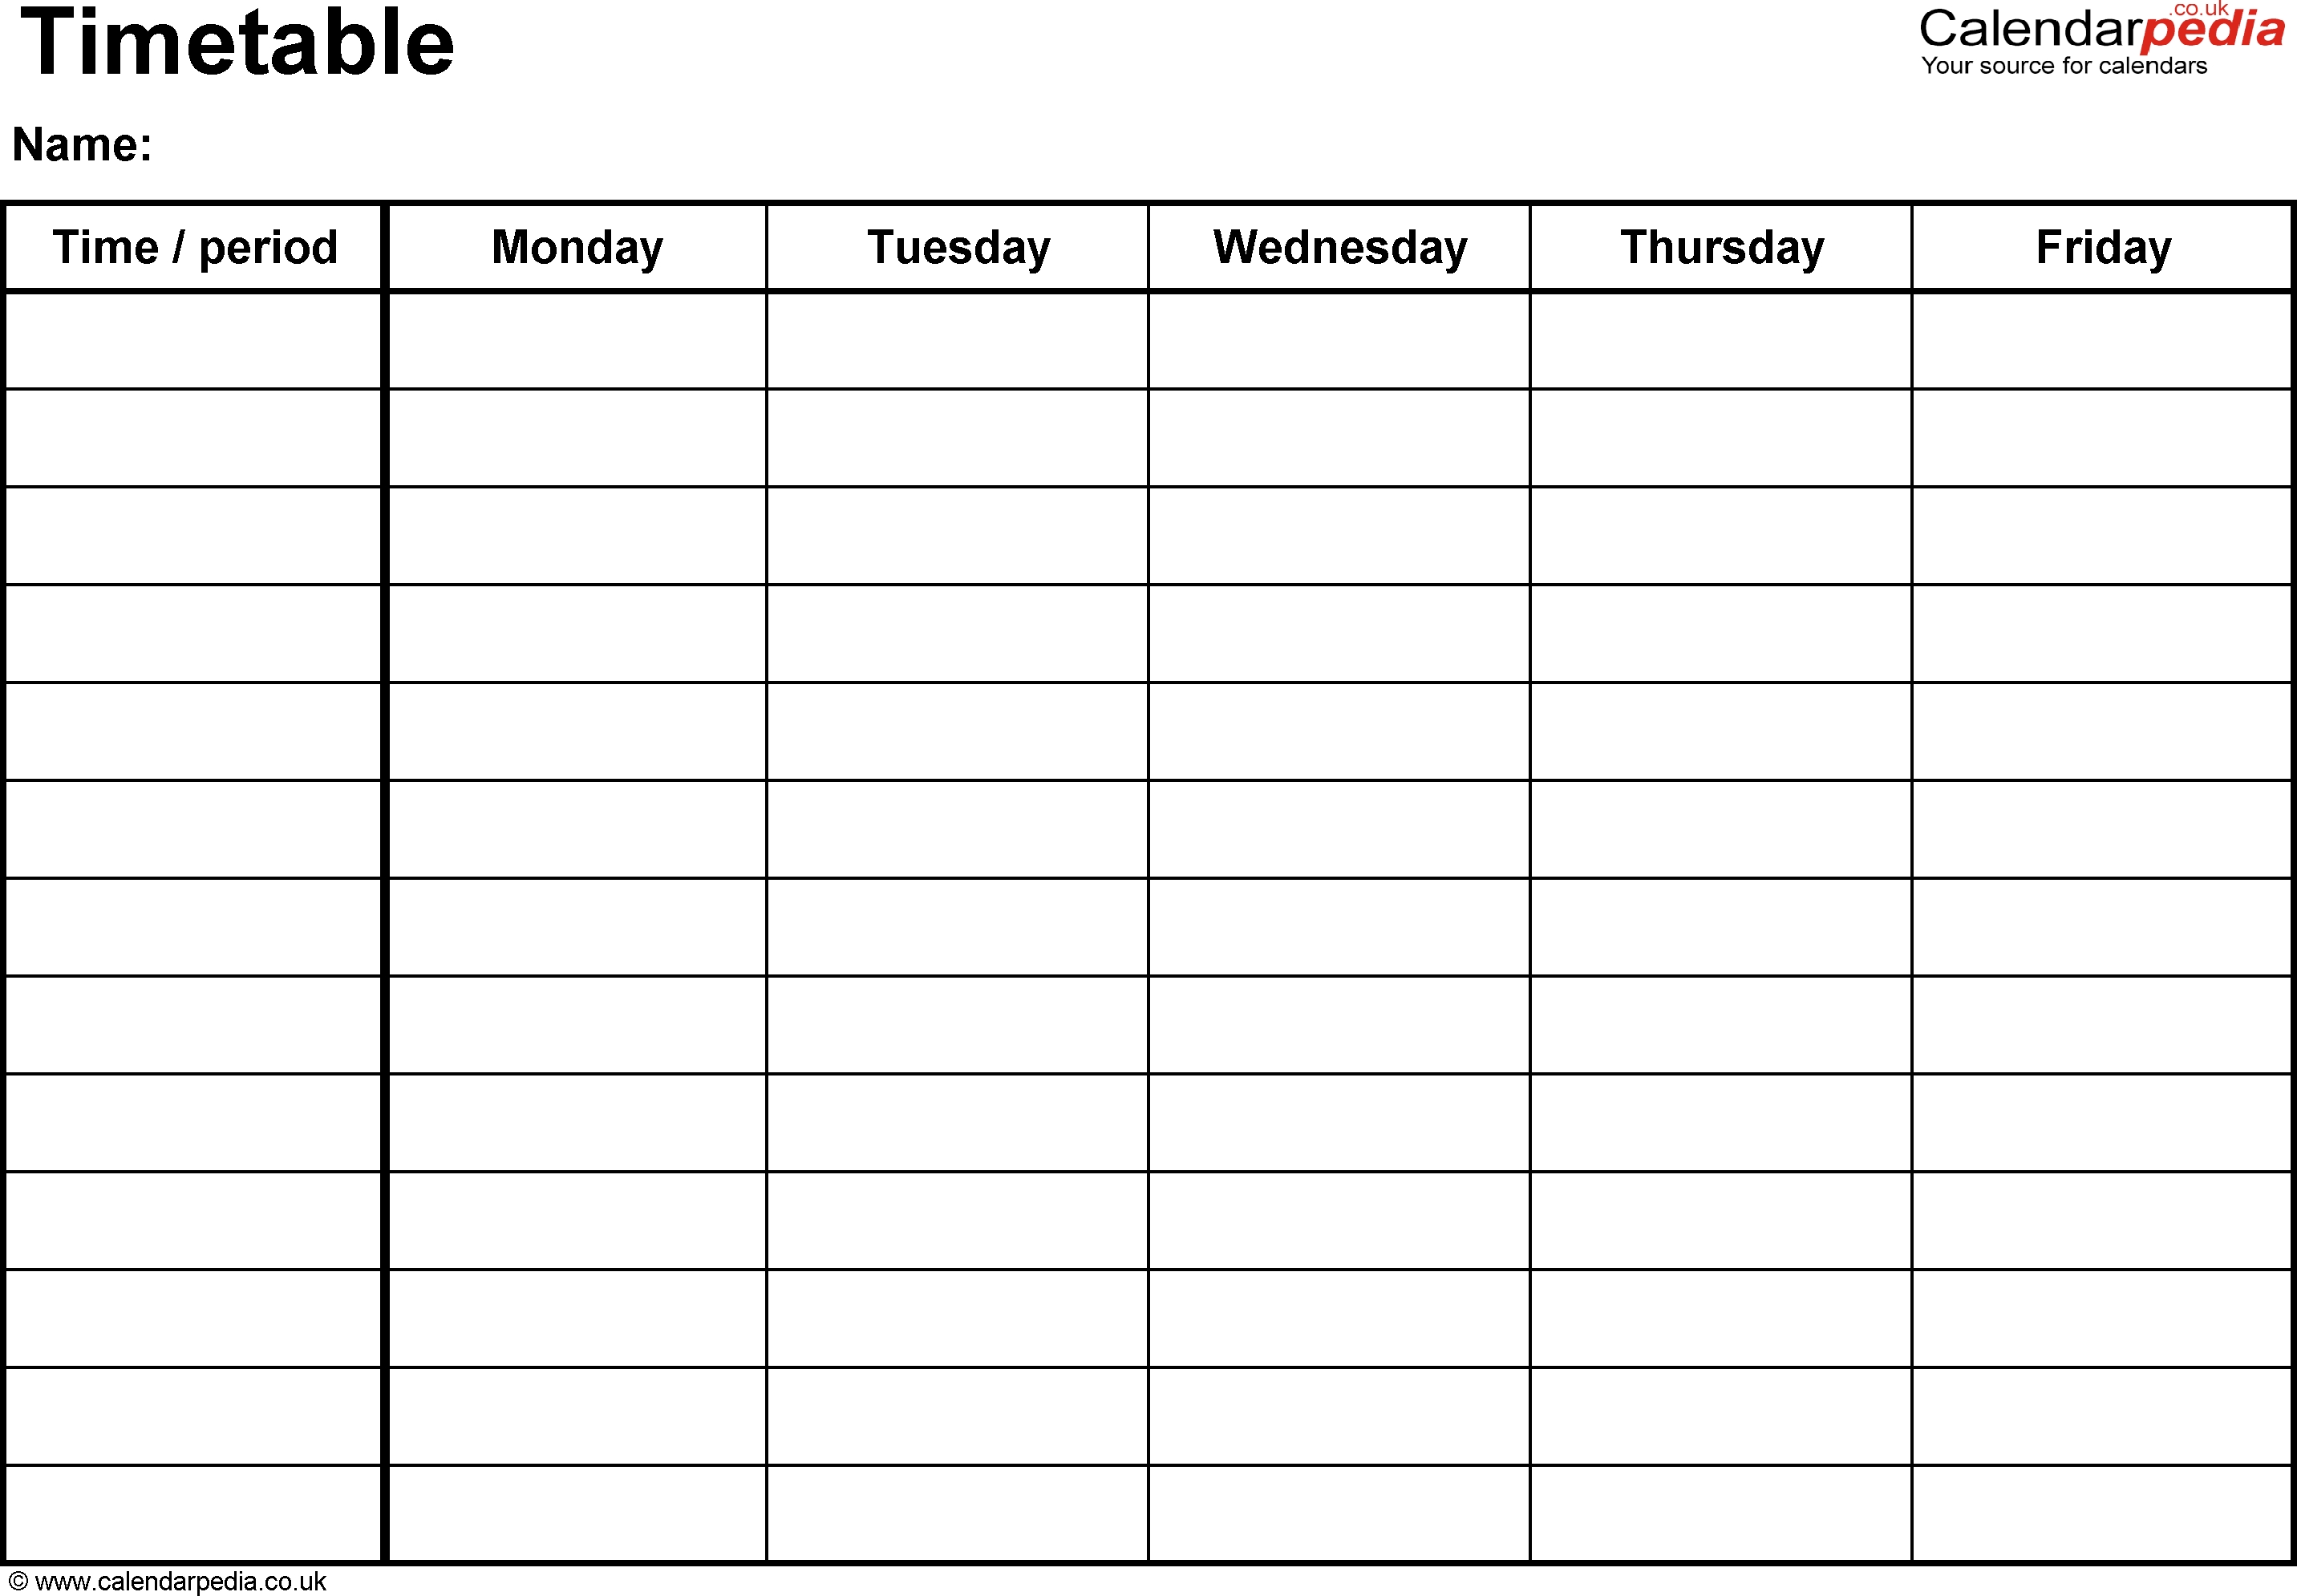 Excel Timetable Template 1: Landscape Format, A4, 1 Page Monday Through Friday Word Calendar